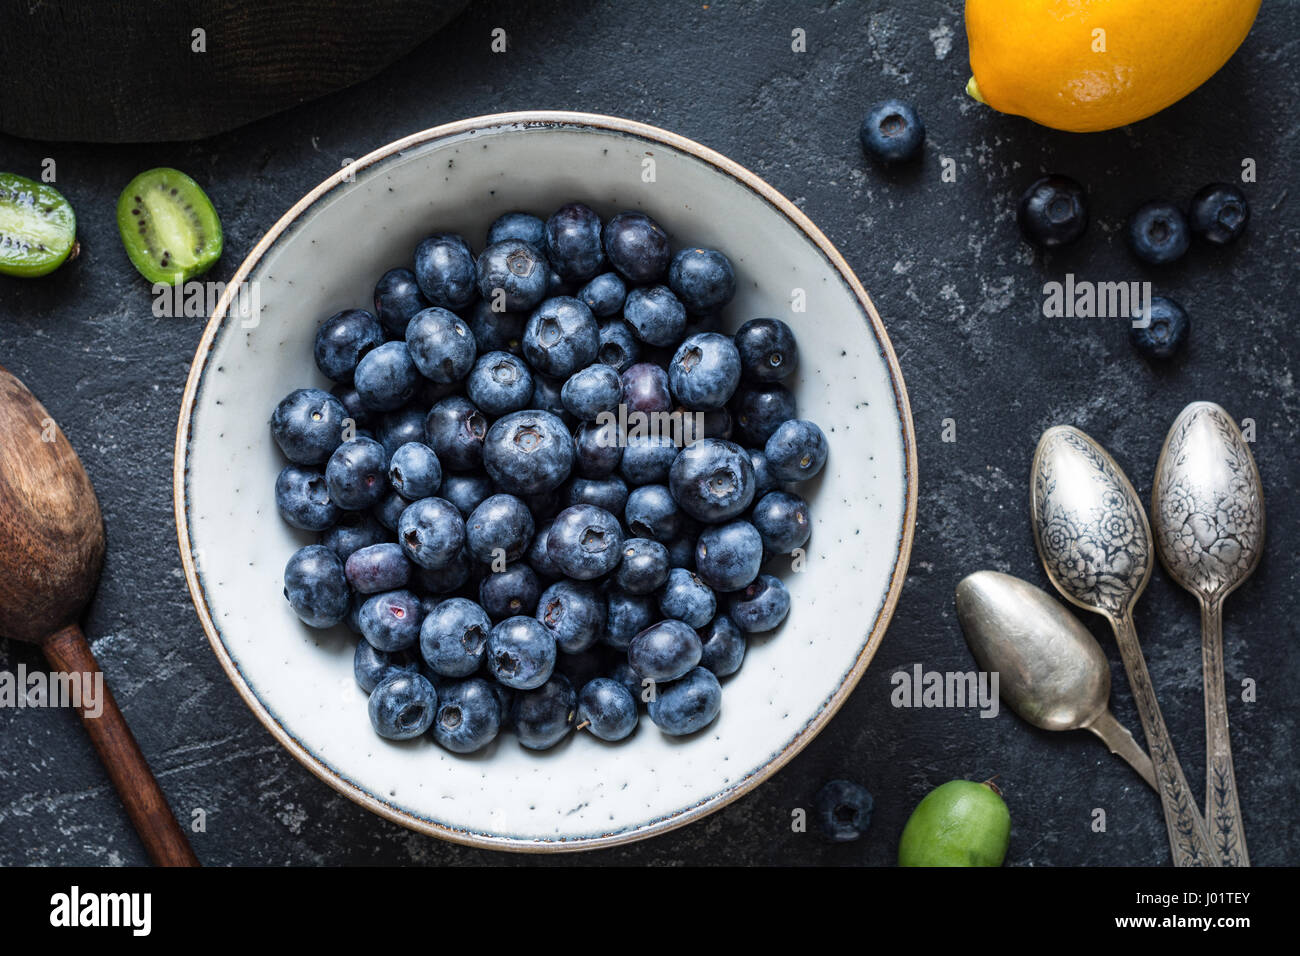 Blueberries and vintage spoons: Top view of fresh blueberries in white ceramic bowl with baby kiwi fruit, lemon and vintage tea spoons on dark stone t Stock Photo